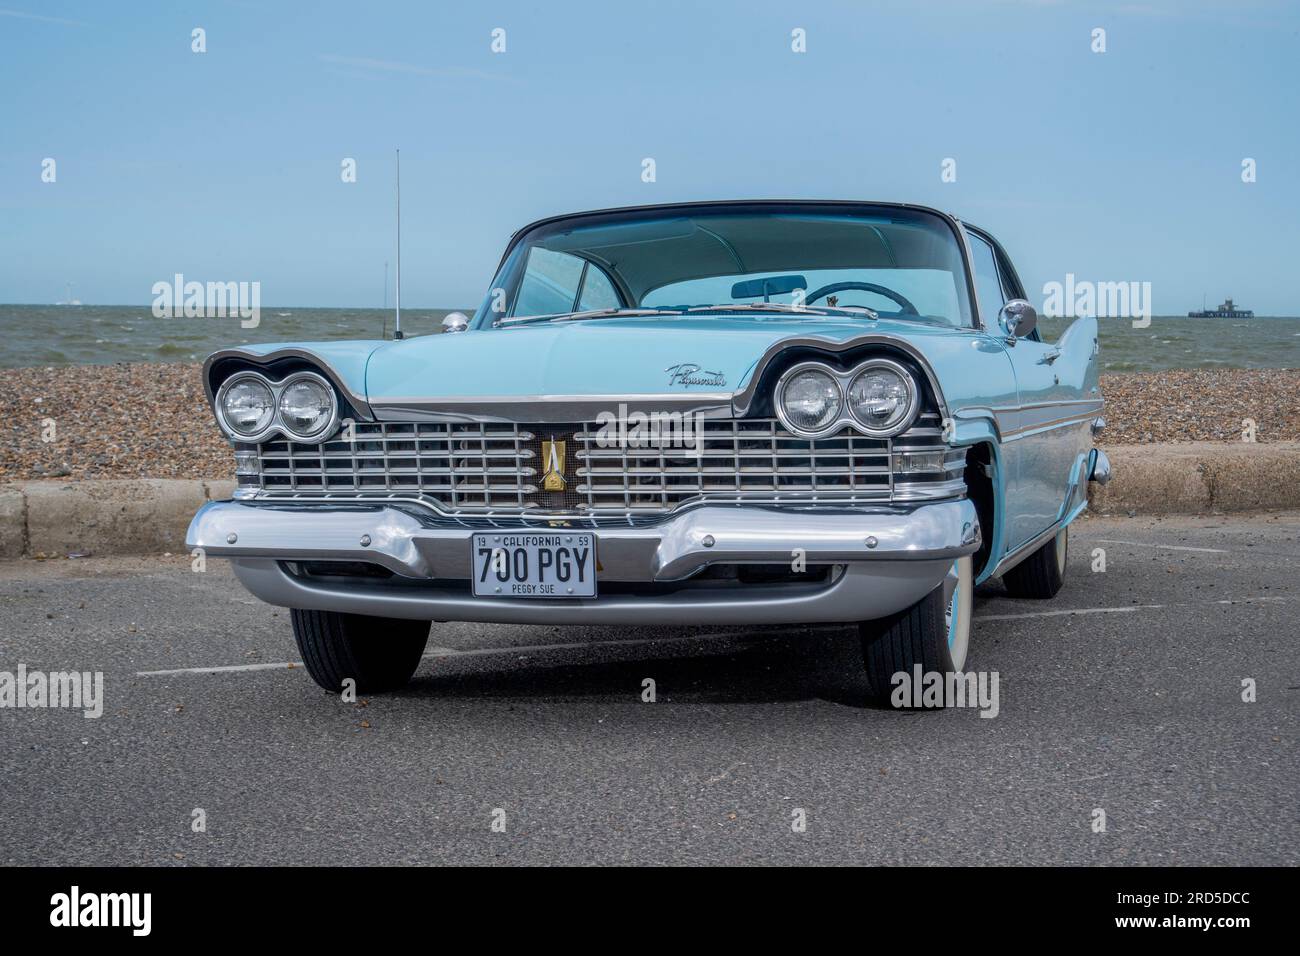 1959 Plymouth Fury full size classic American family car Stock Photo